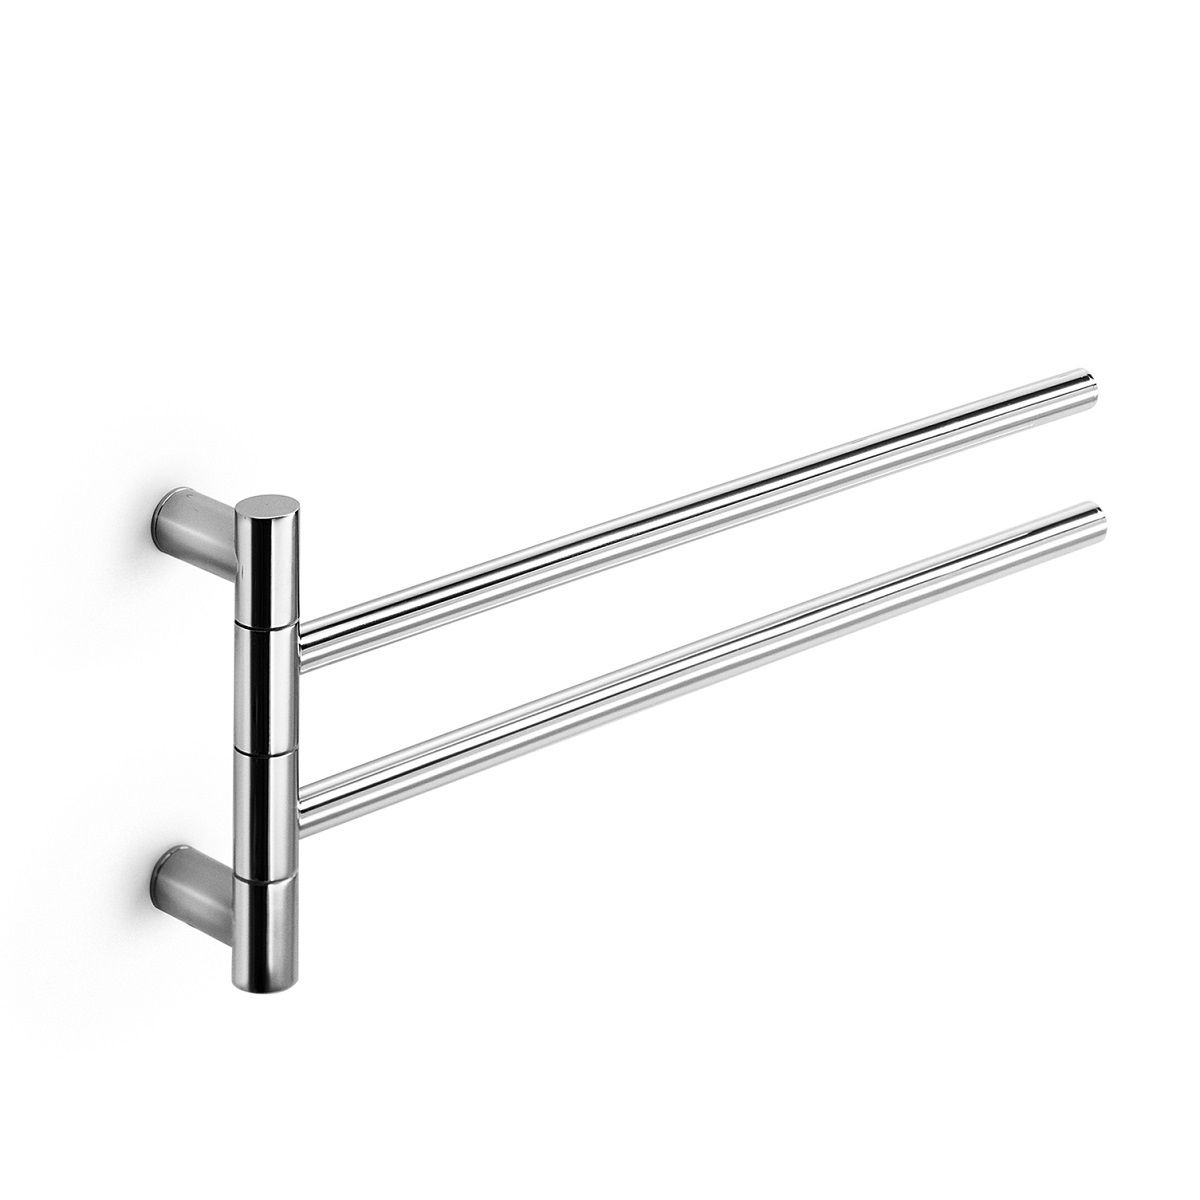 How to Accurately Measure your Bathroom to Decide on a Towel Bar?